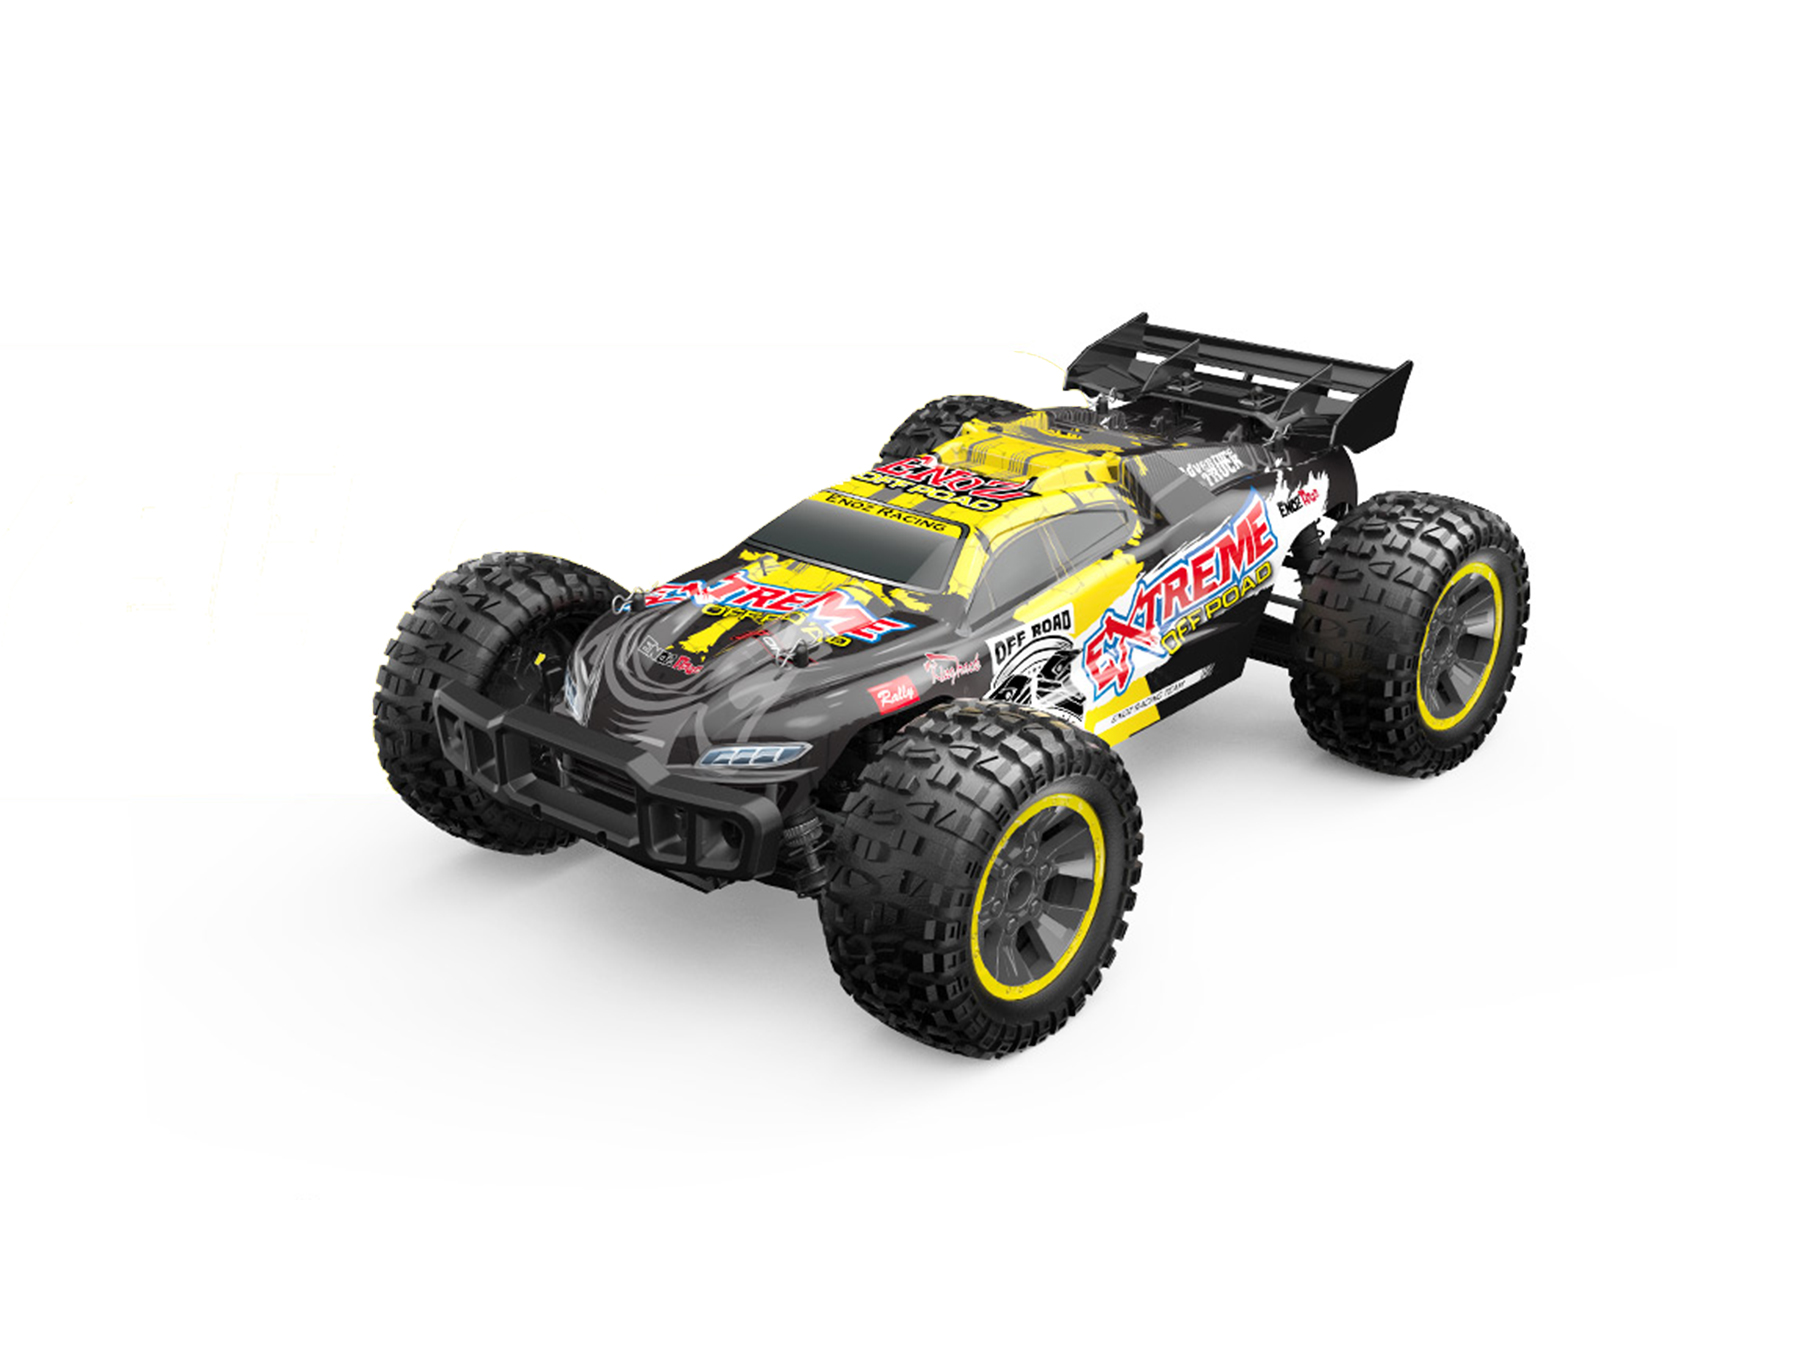 202E - 1:10 2.4G Brushless water proof high speed racing car, 60km/h